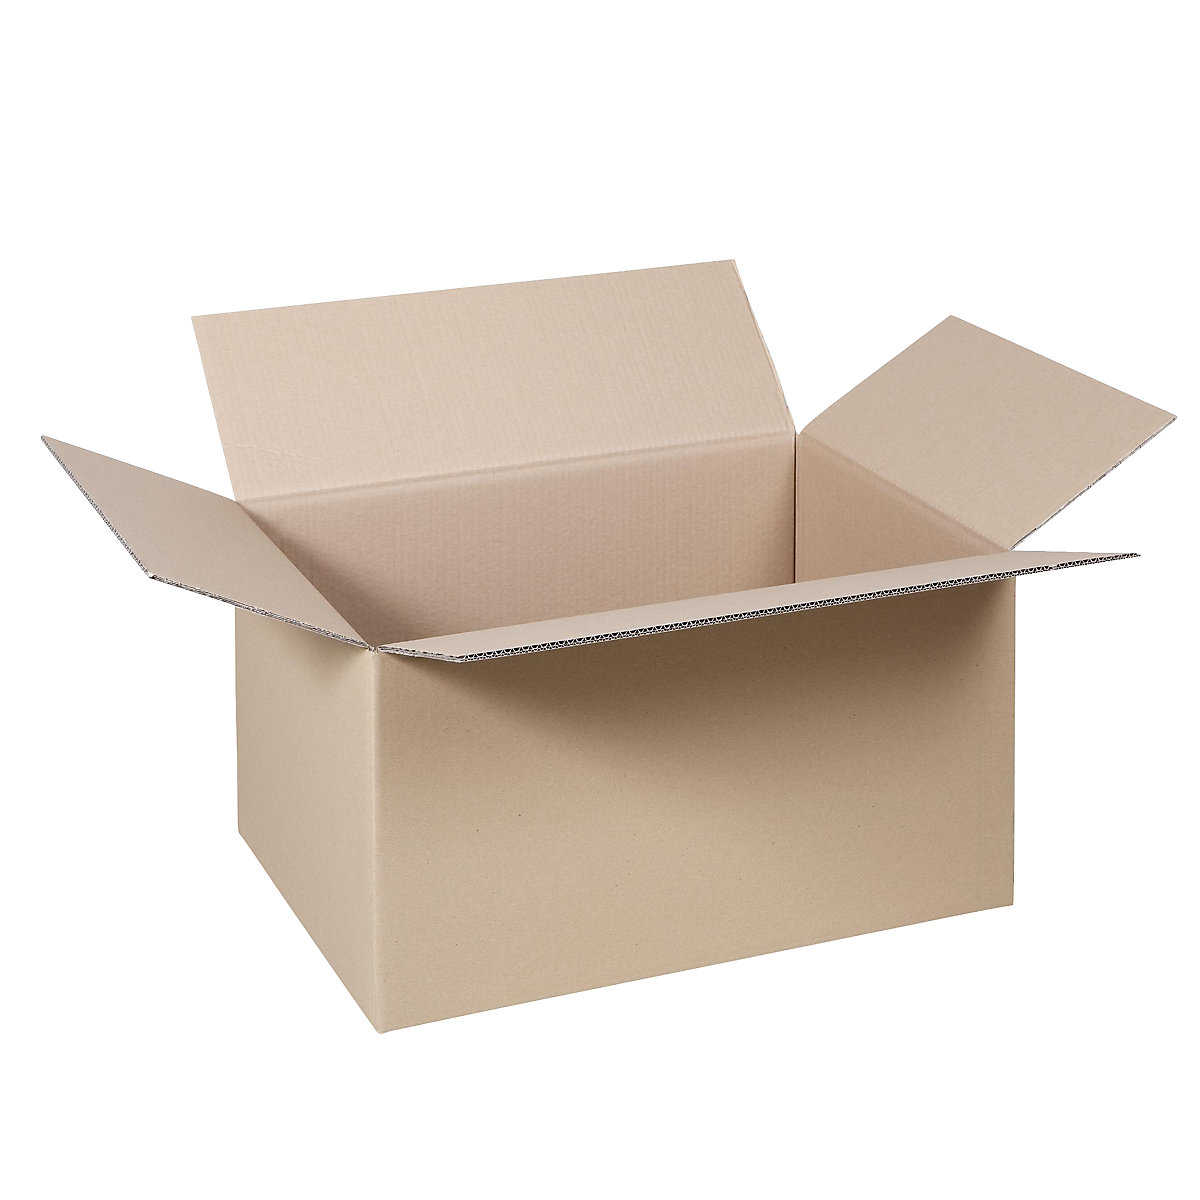 Folding cardboard box, FEFCO 0201, made of double fluted cardboard, internal dimensions 484 x 384 x 368 mm, pack of 50-34